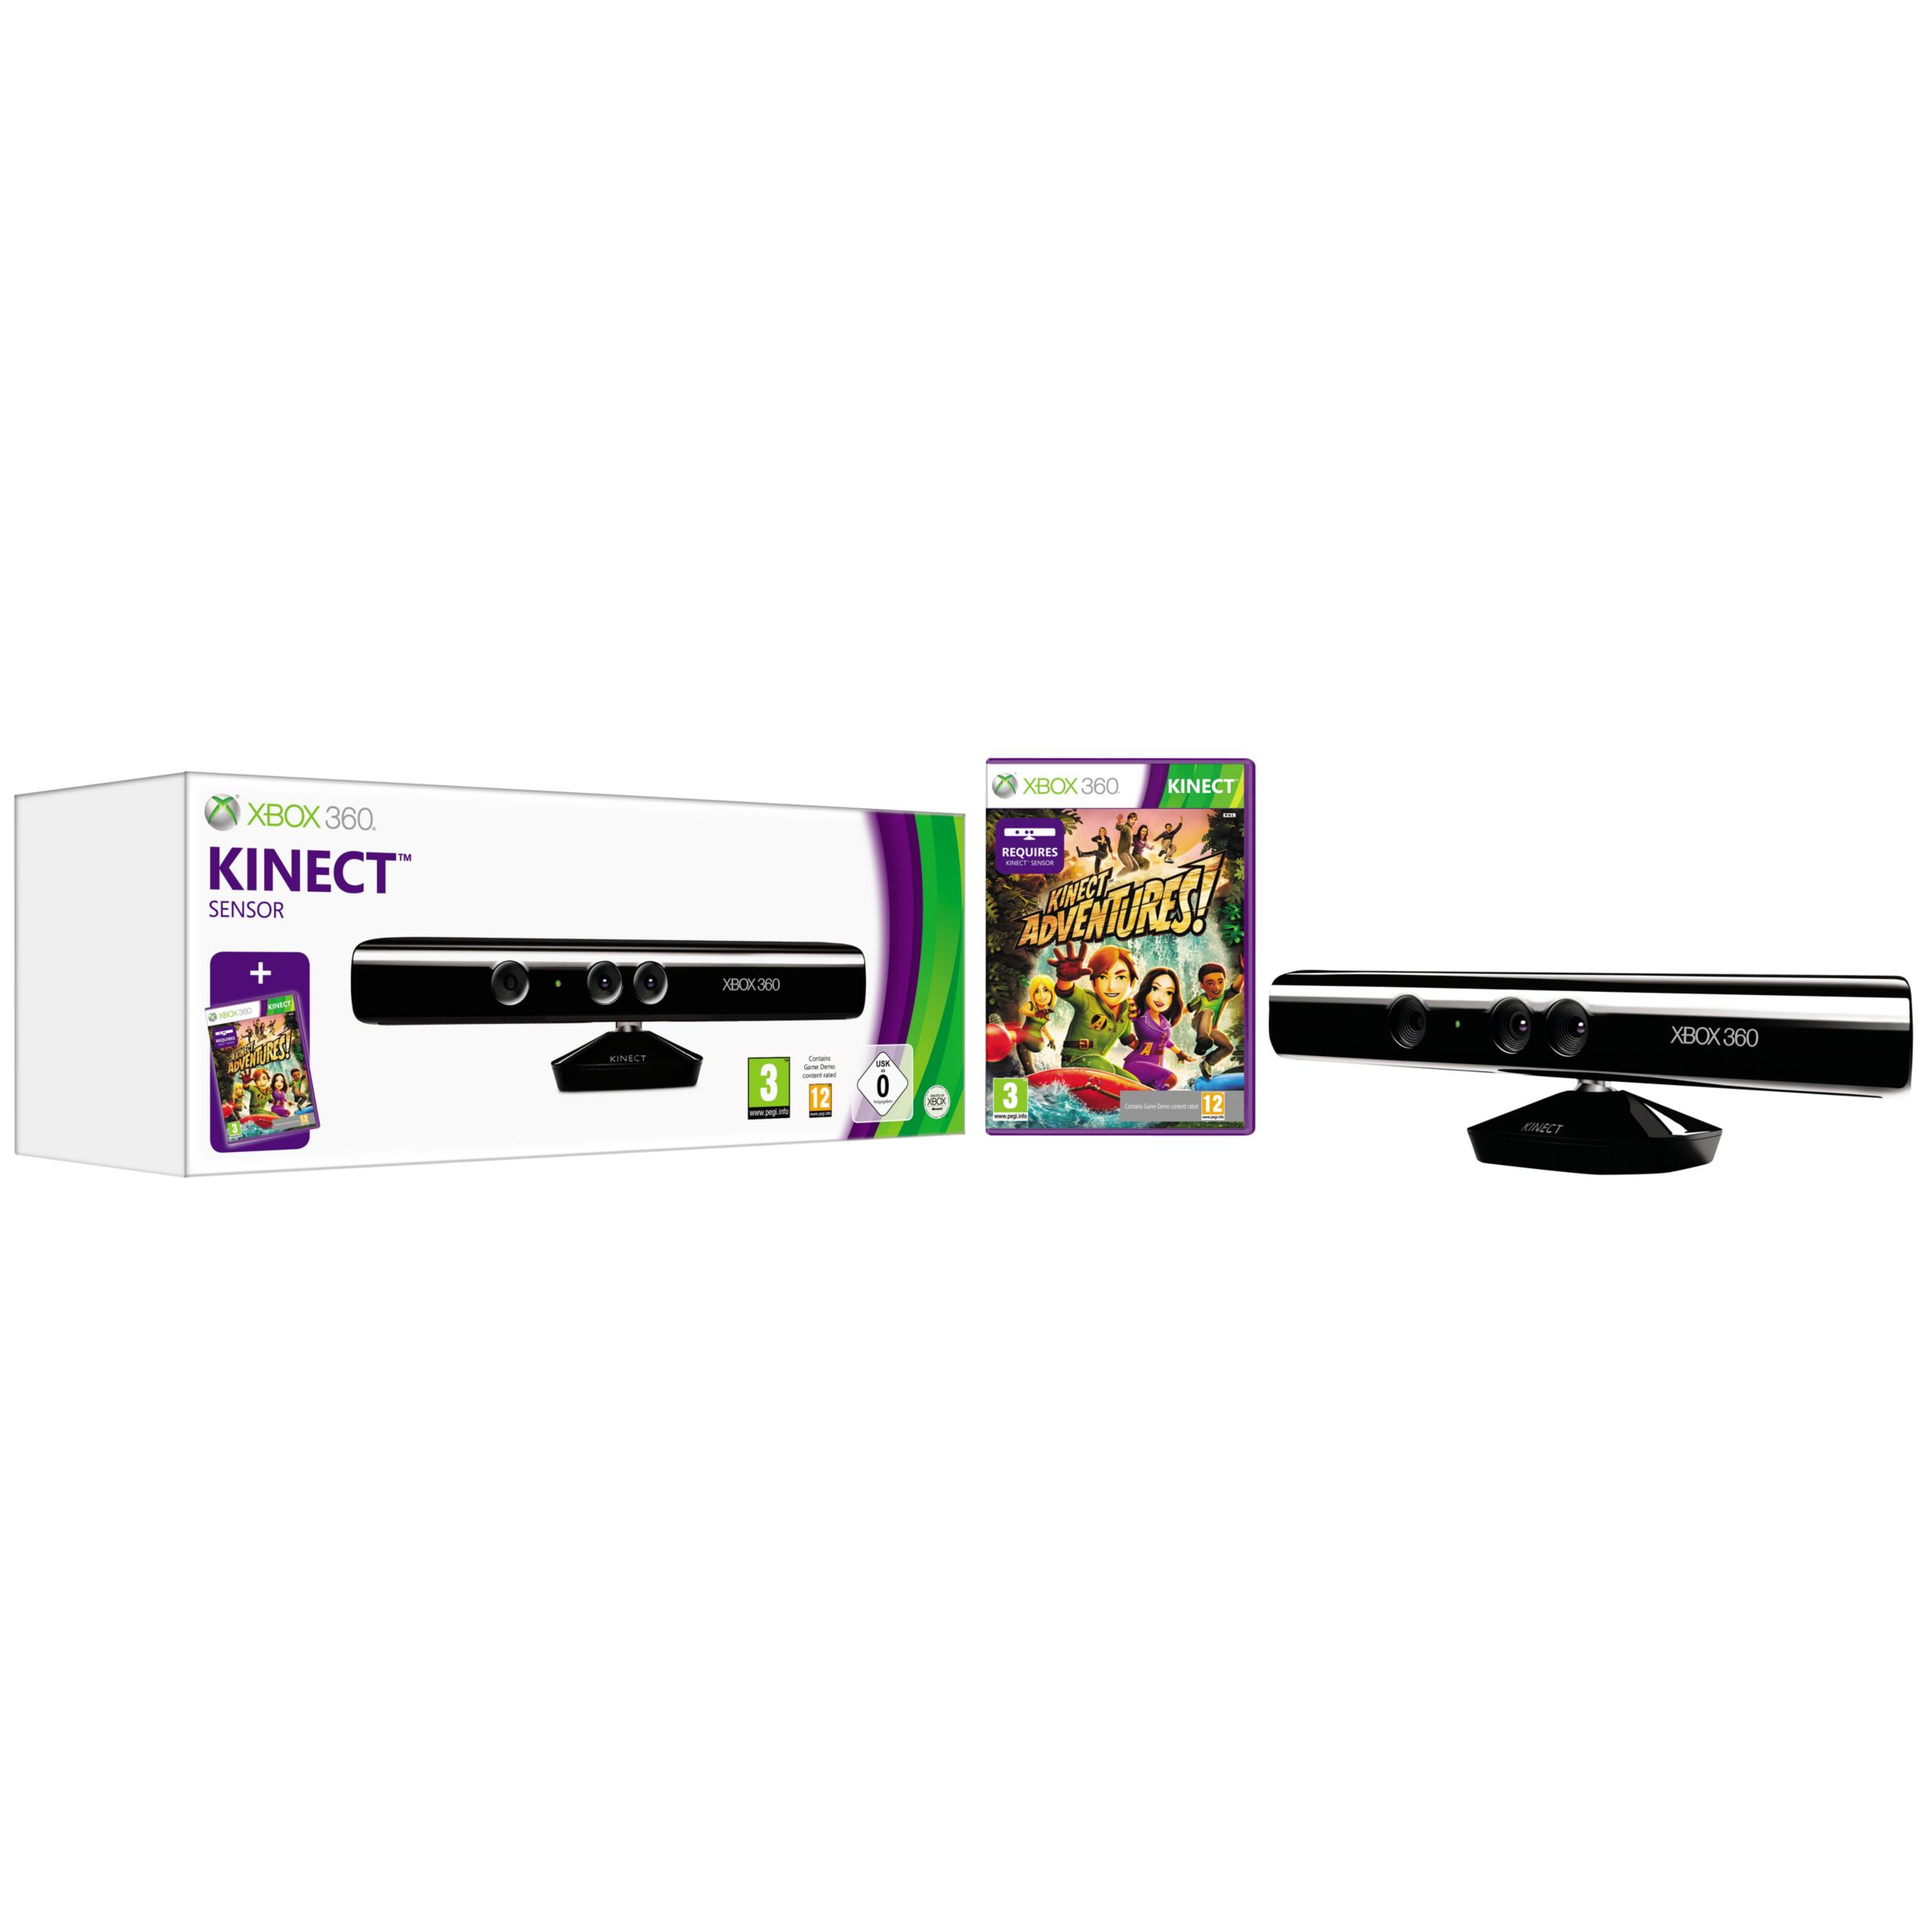 Microsoft Kinect Controller, Kinectimals & Dance Central for Xbox 360 at John Lewis